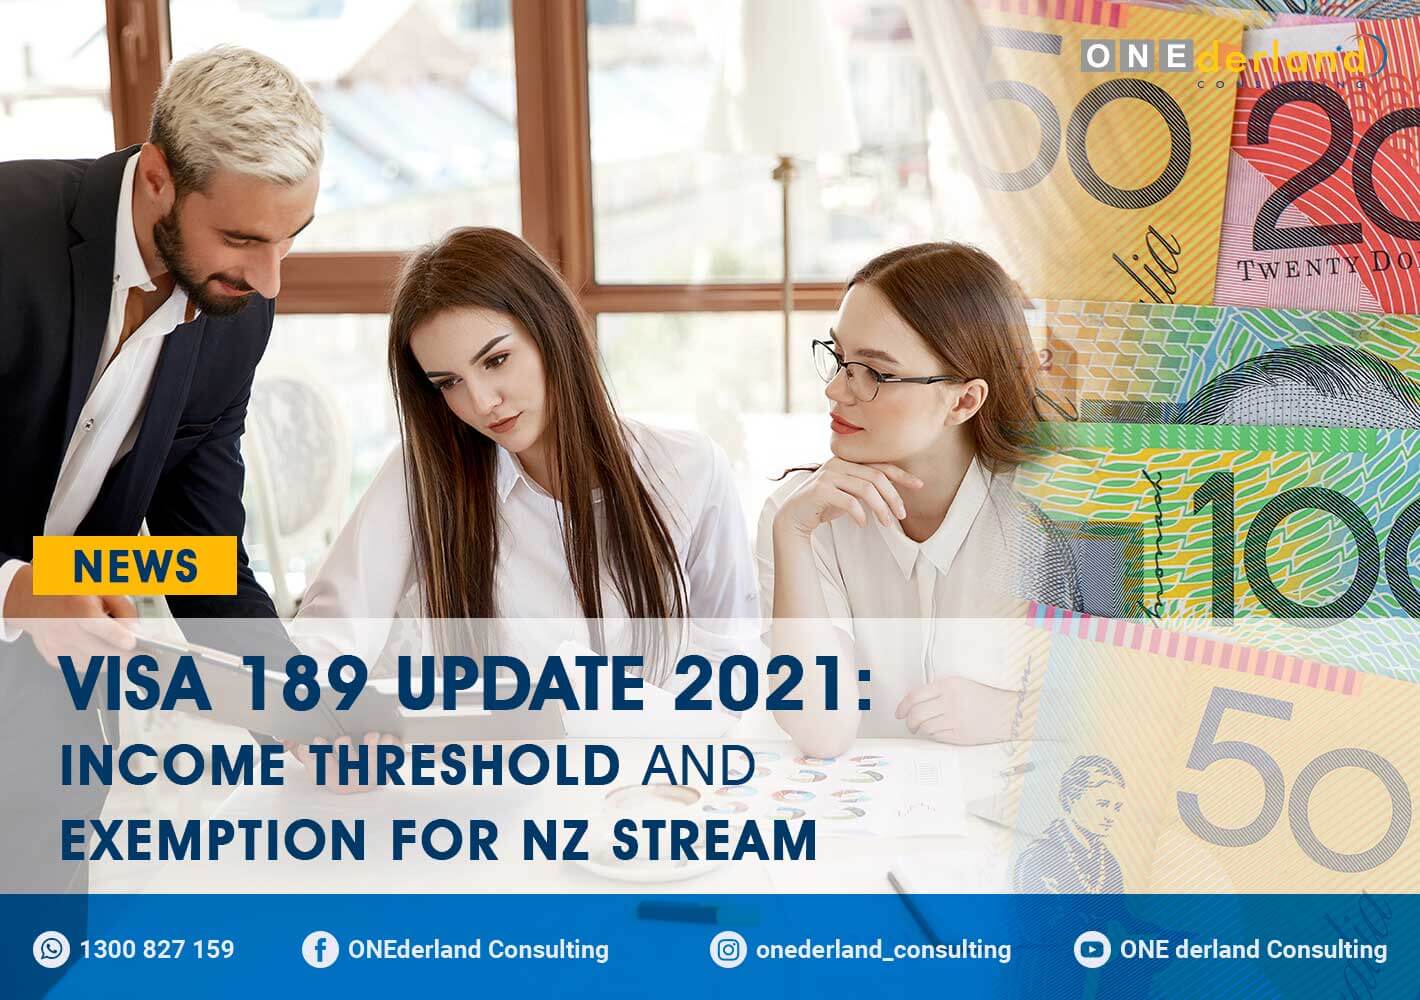 Update for Income Threshold and Exemption for Visa 189 New Zealand Stream